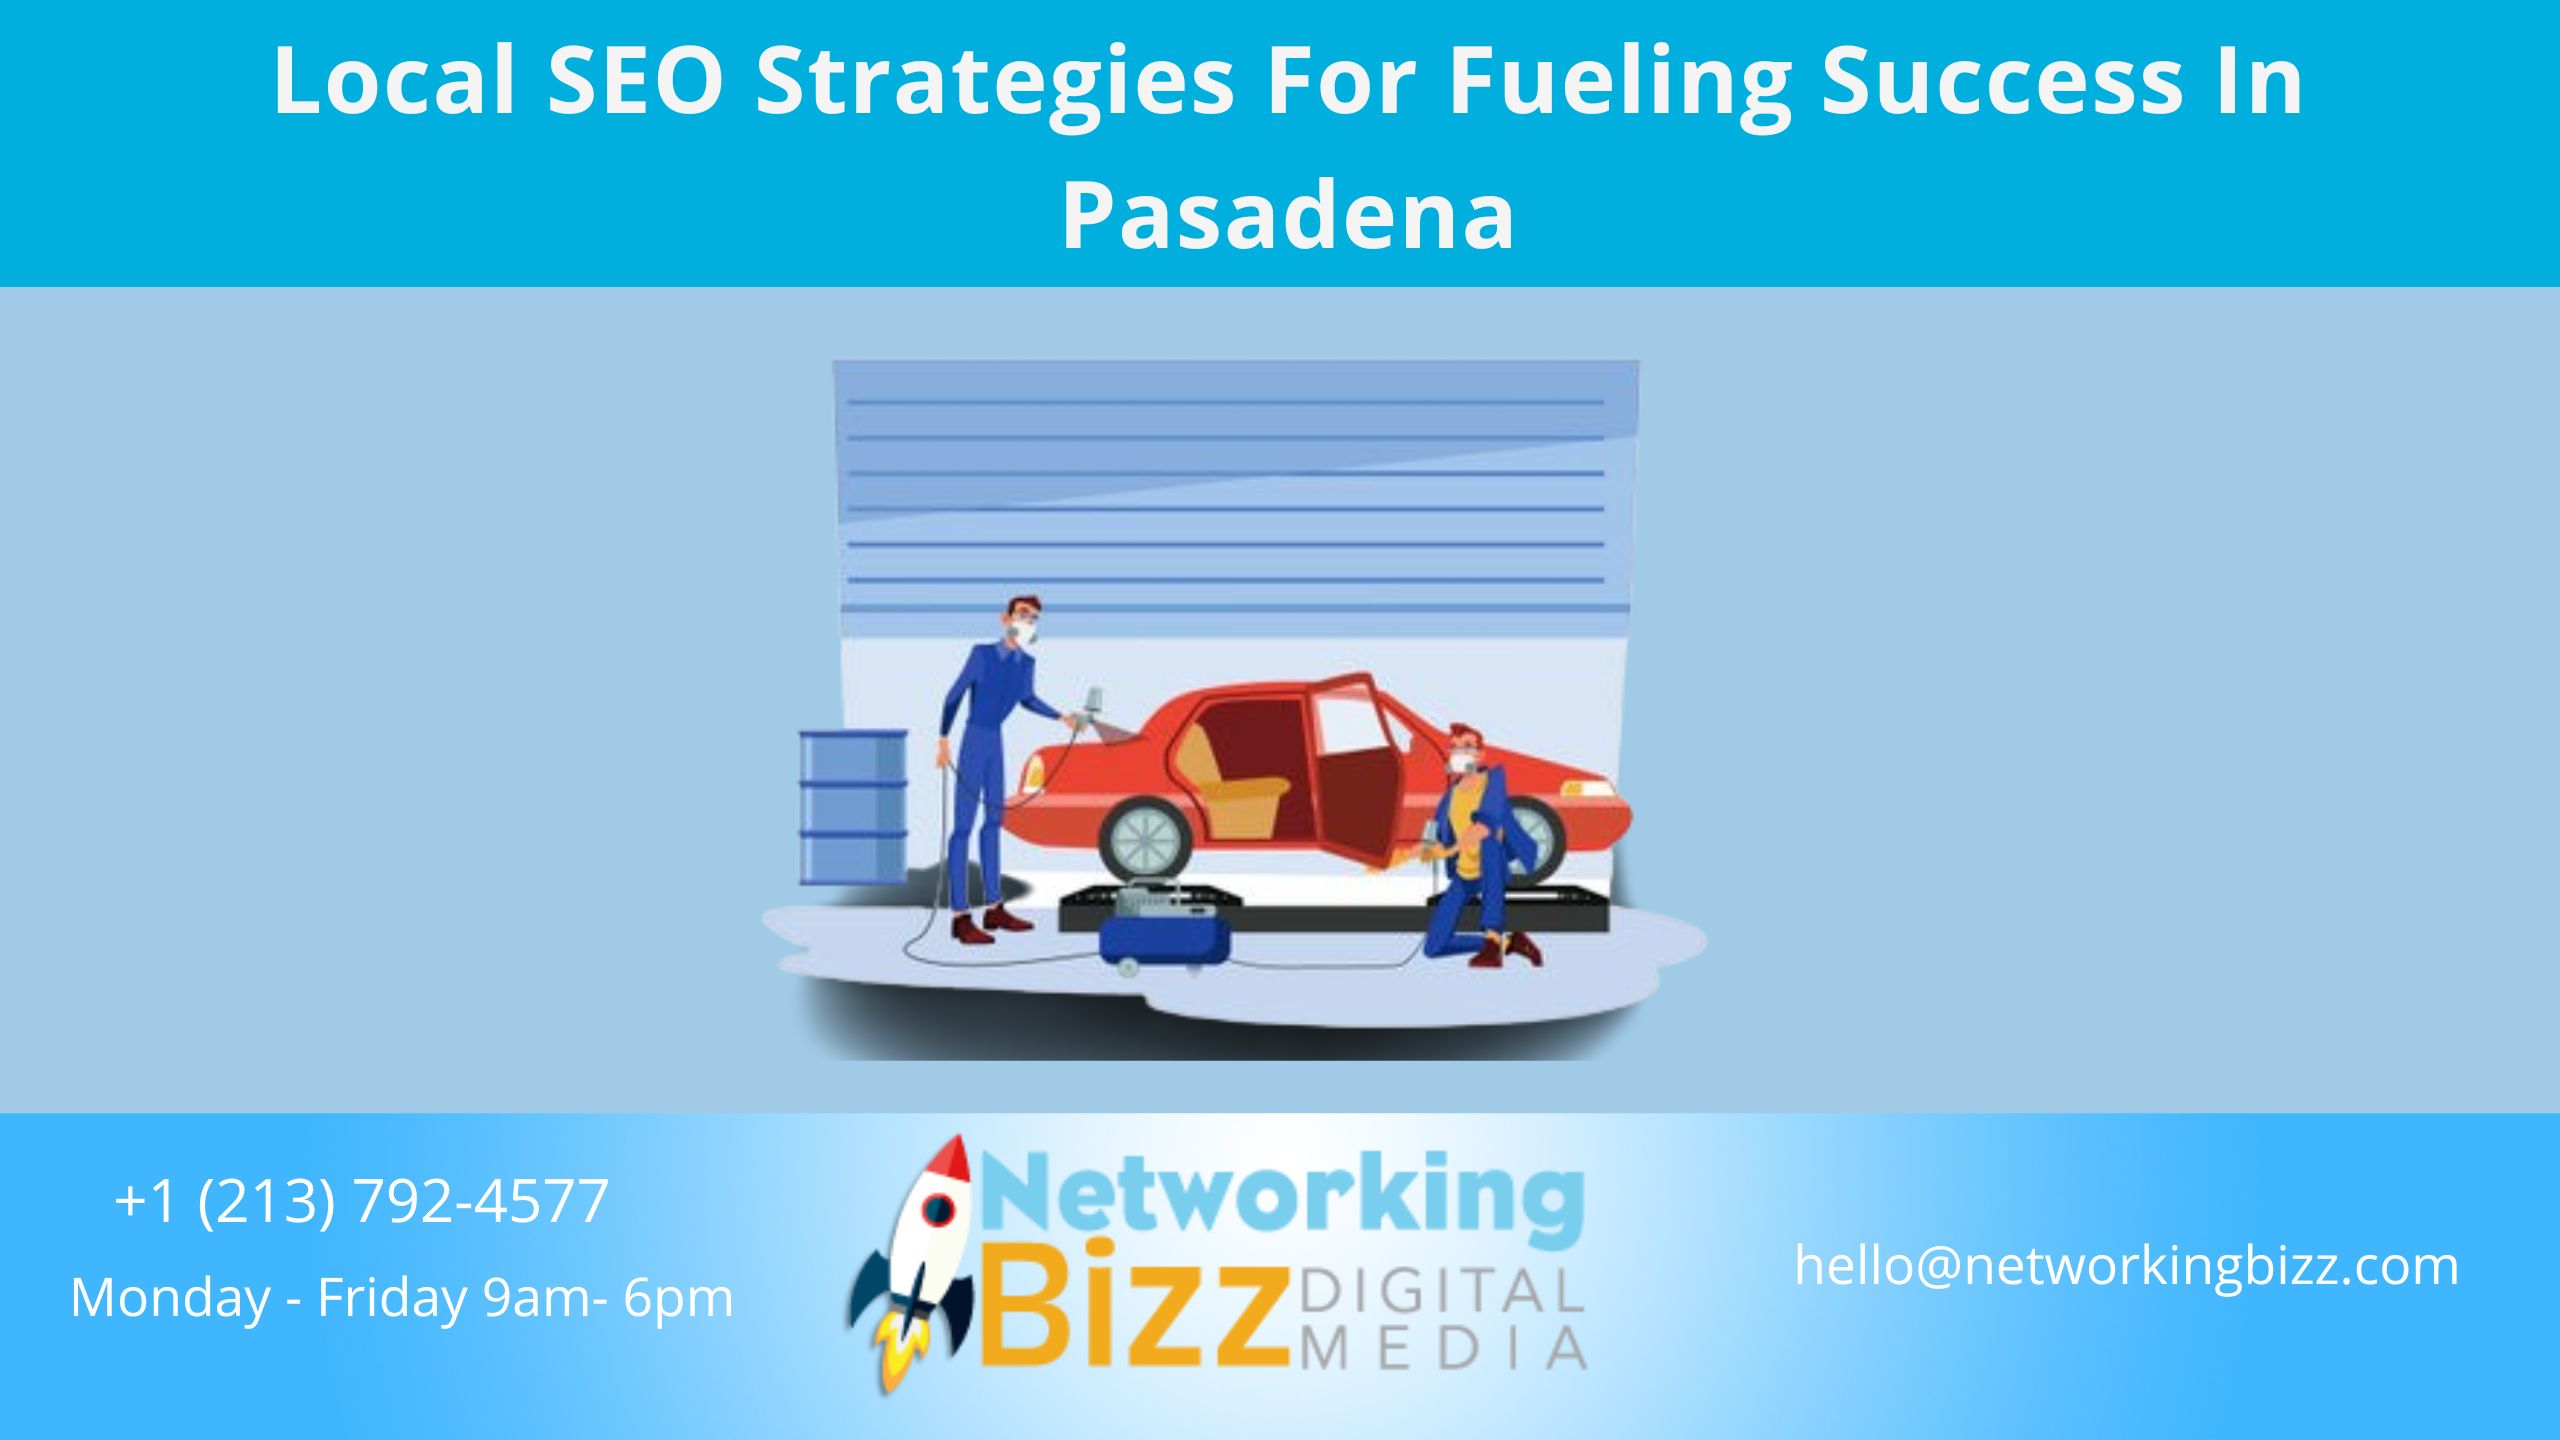 Local SEO Strategies For Fueling Success In Pasadena